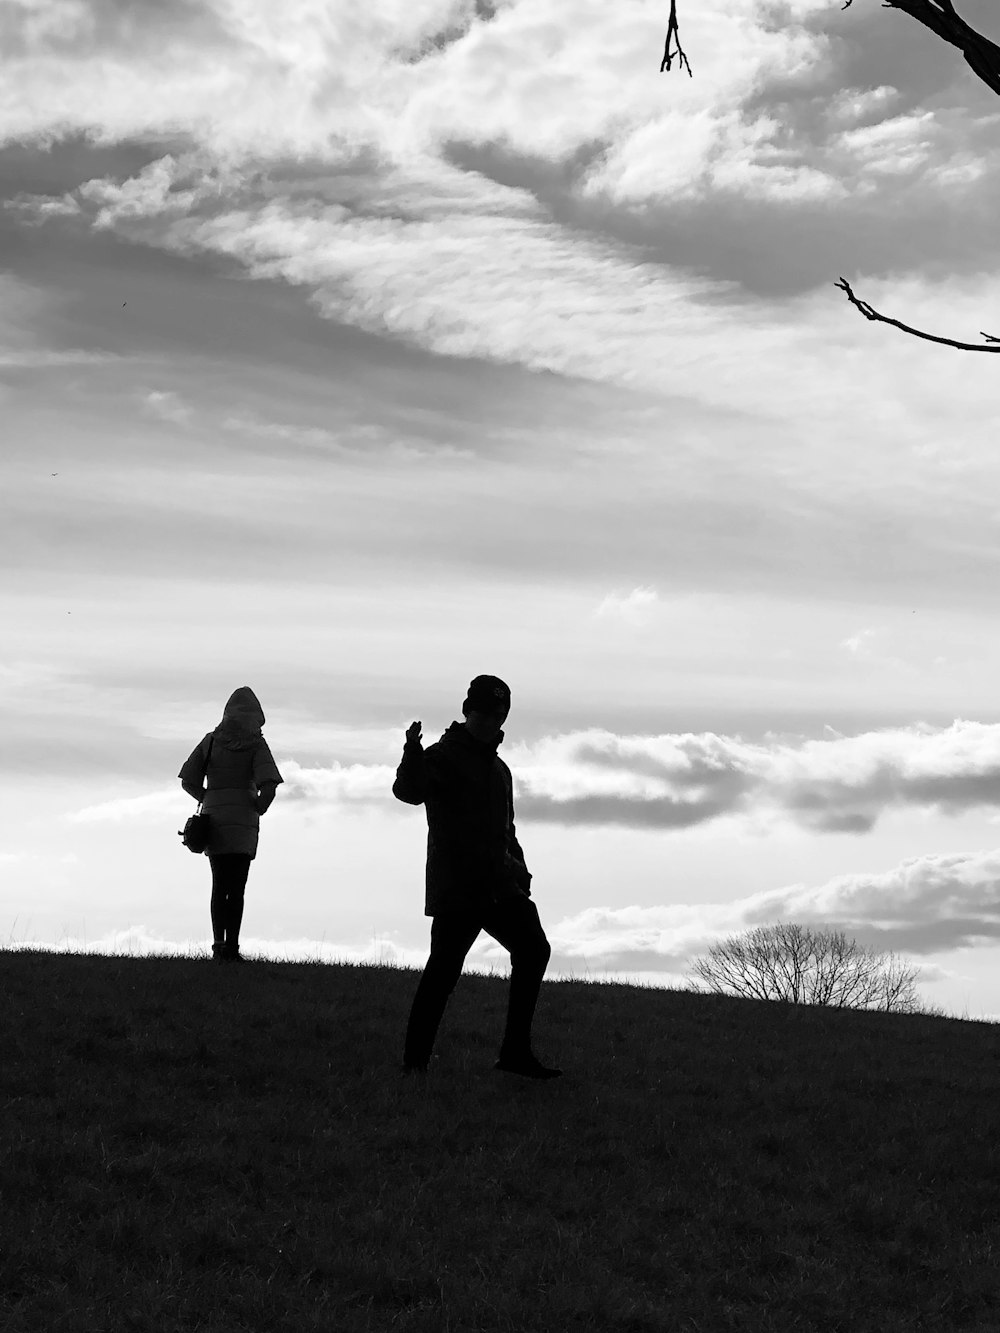 silhouette of 2 person standing on grass field under cloudy sky during daytime